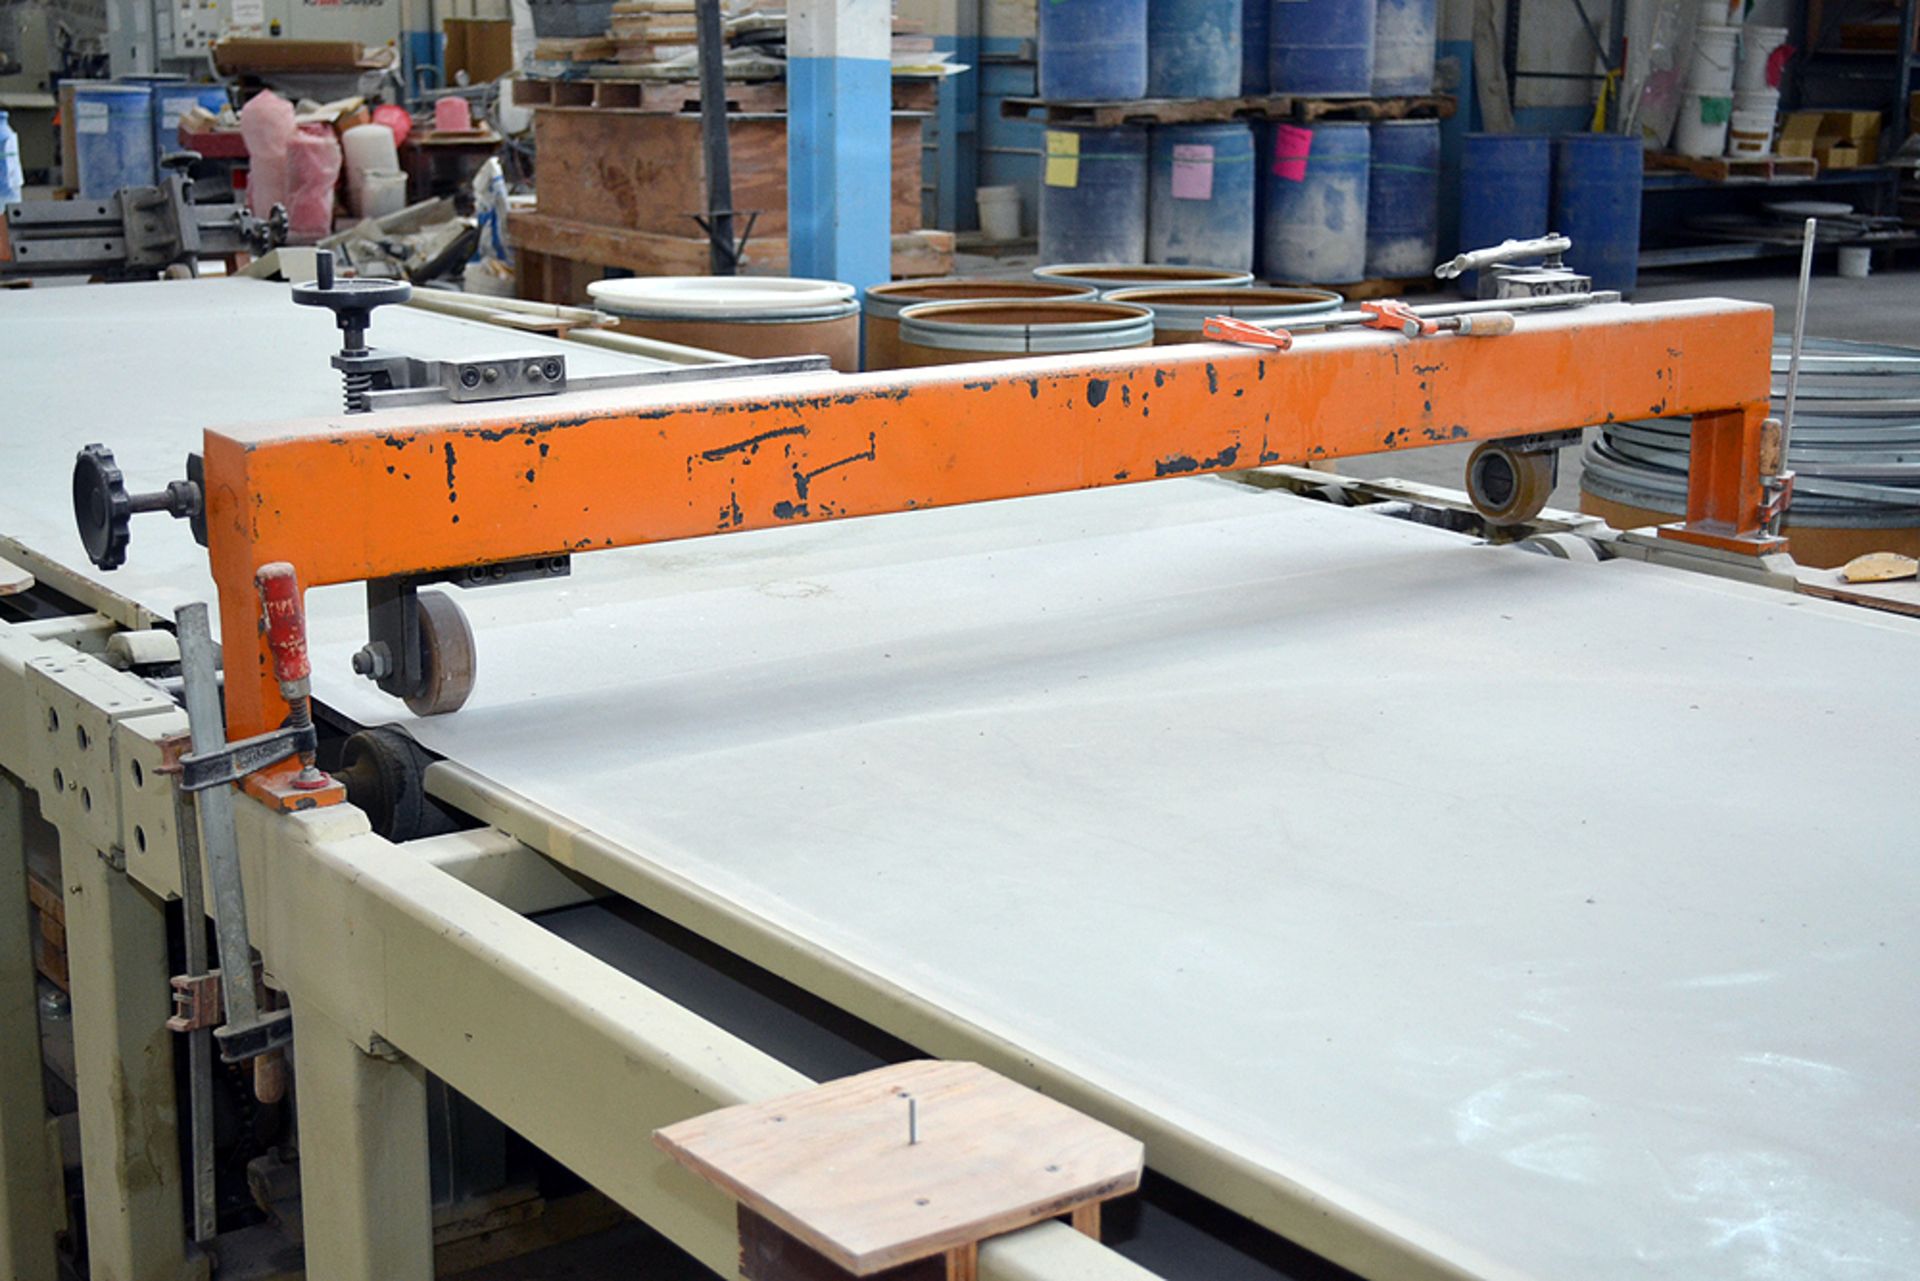 Motorized Belt Conveyer Extrusion Table, 45' w/ (4) 62" Power Belt Conveyers, Rollers etc. - Image 6 of 7